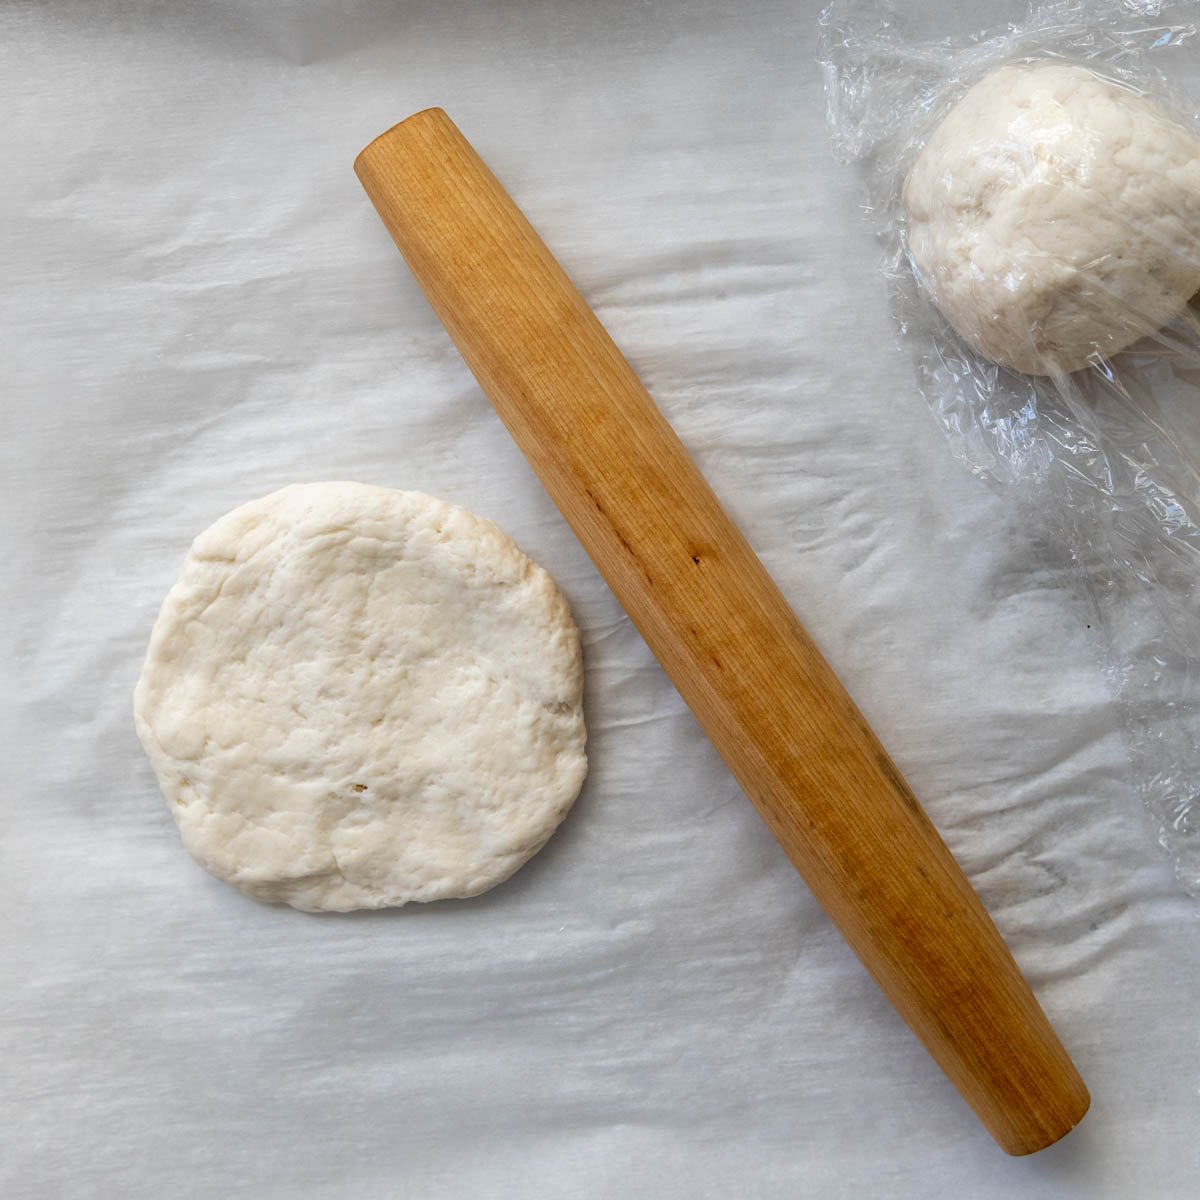 the dough ball flattened before rolling.